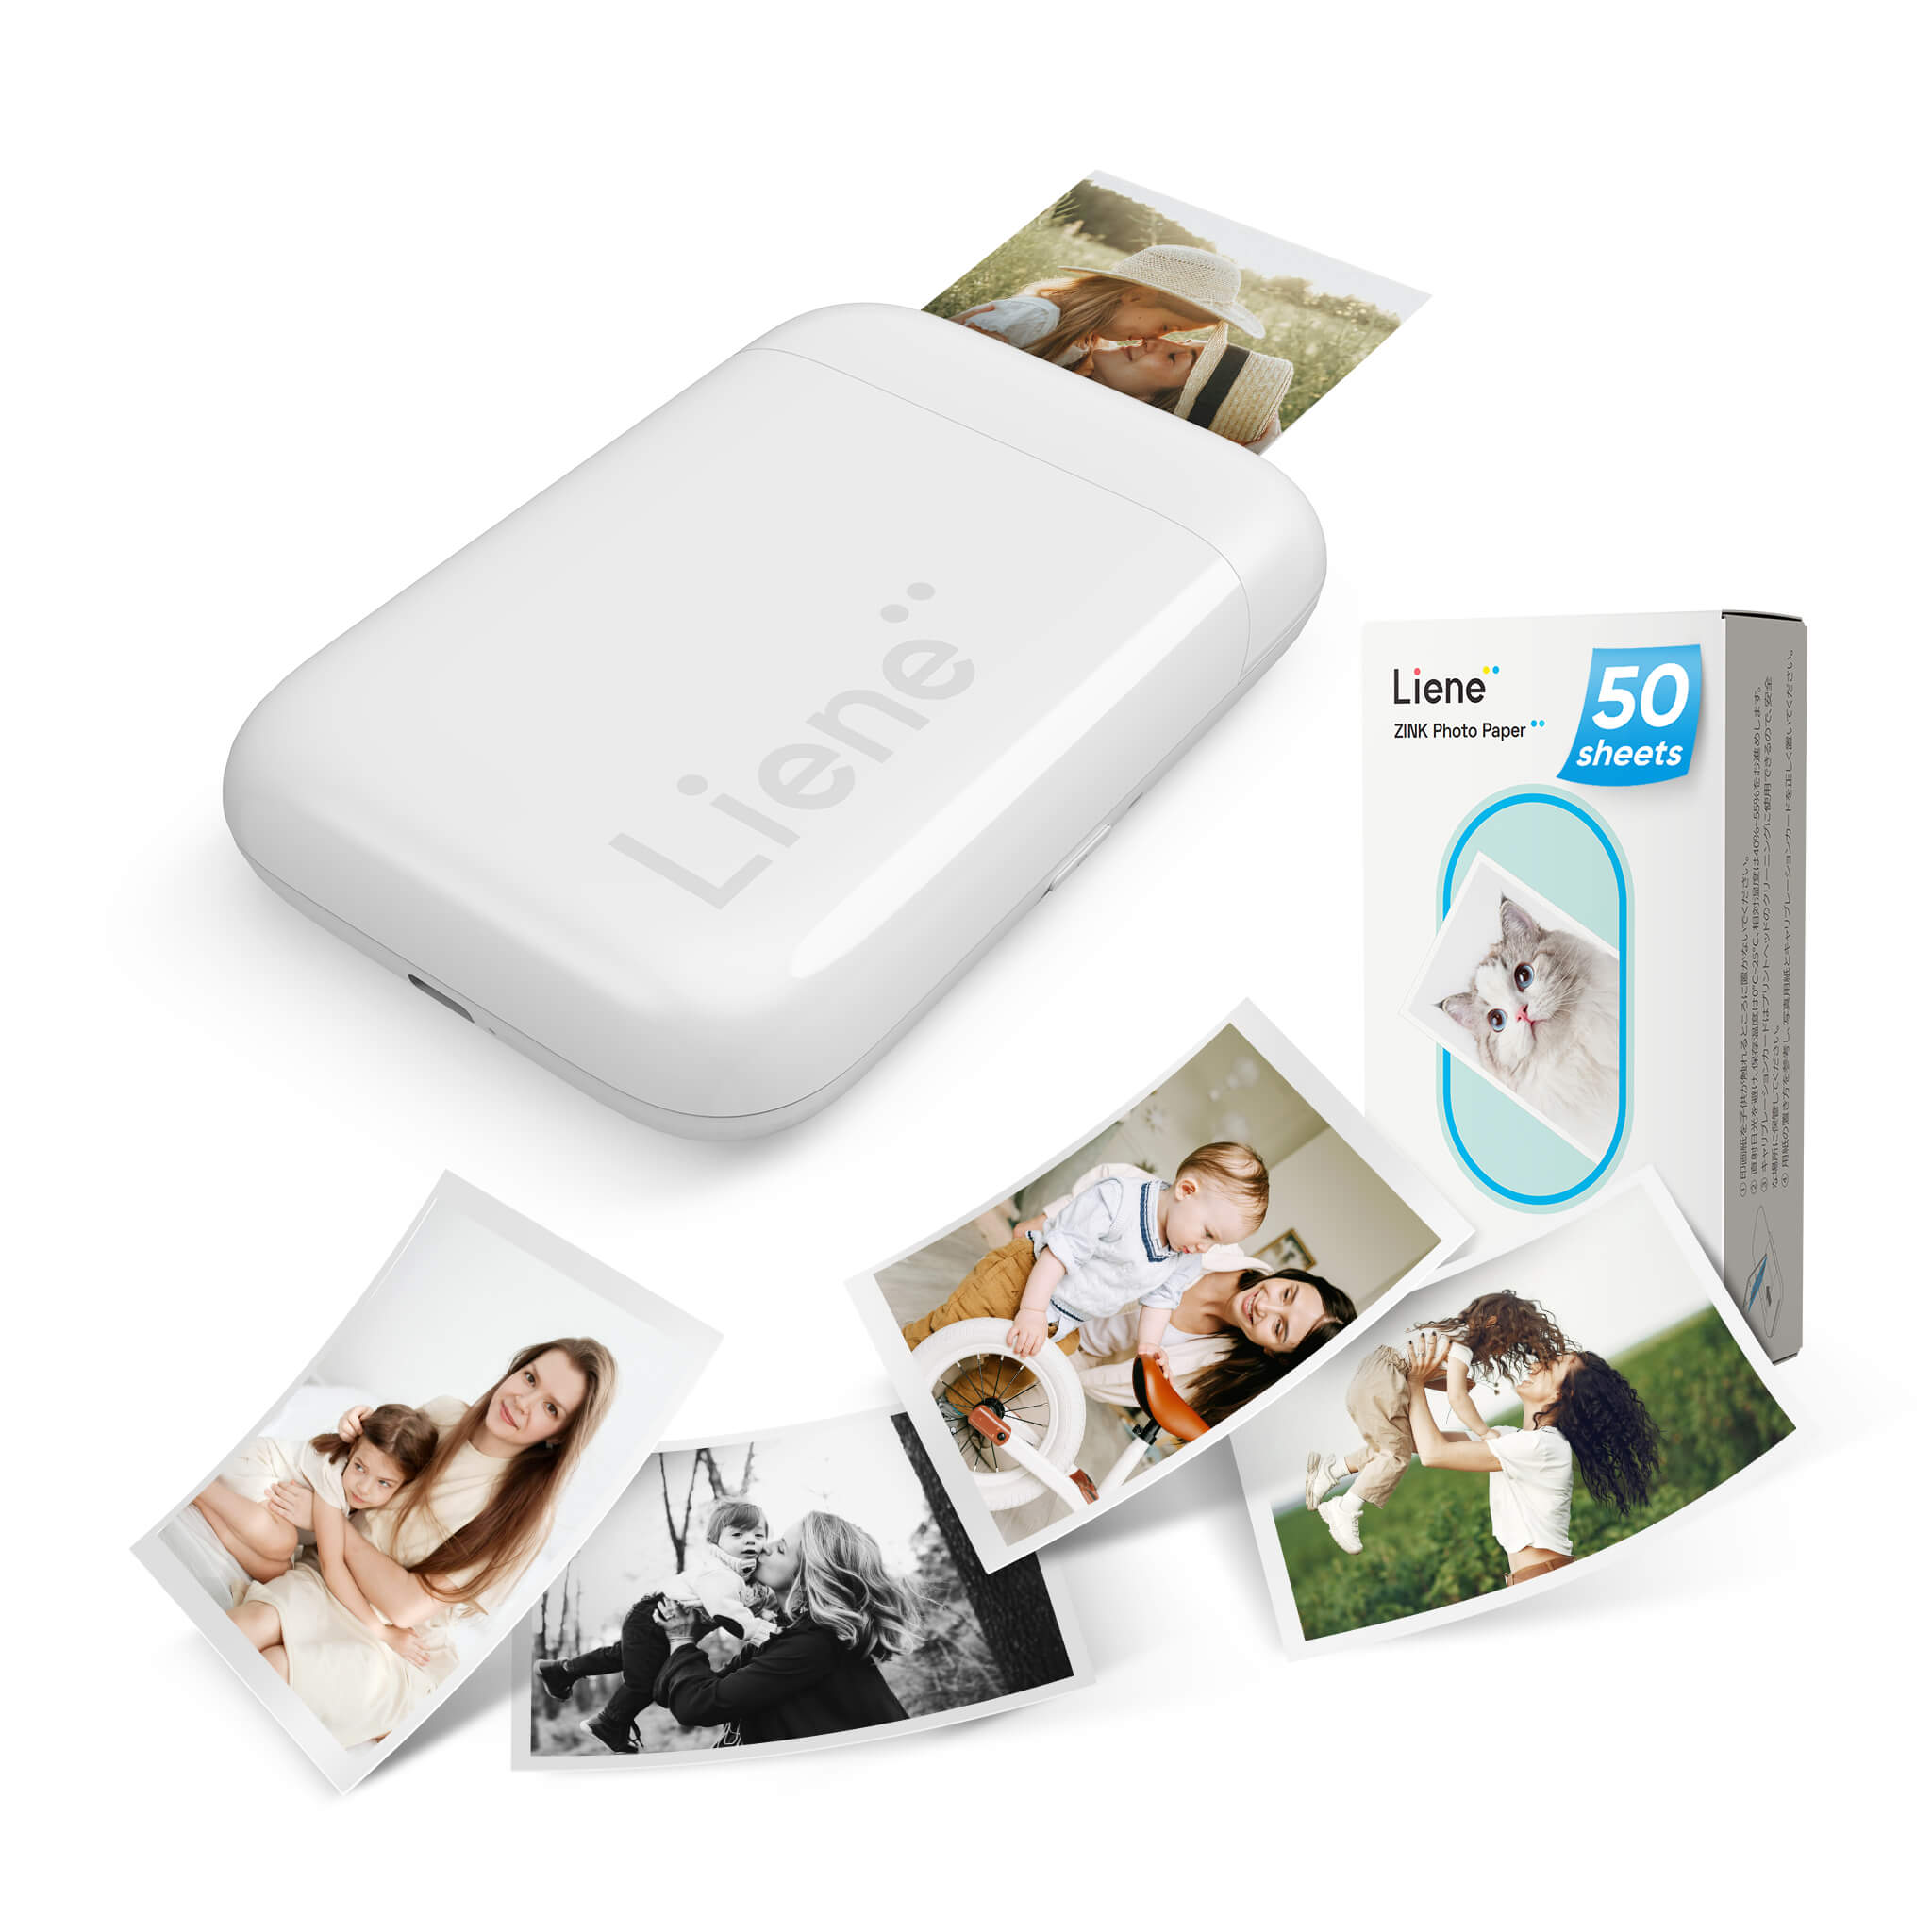 Liene Pearl K100 2x3" Portable Photo Printer - Green (50 Zink Photo Papers)